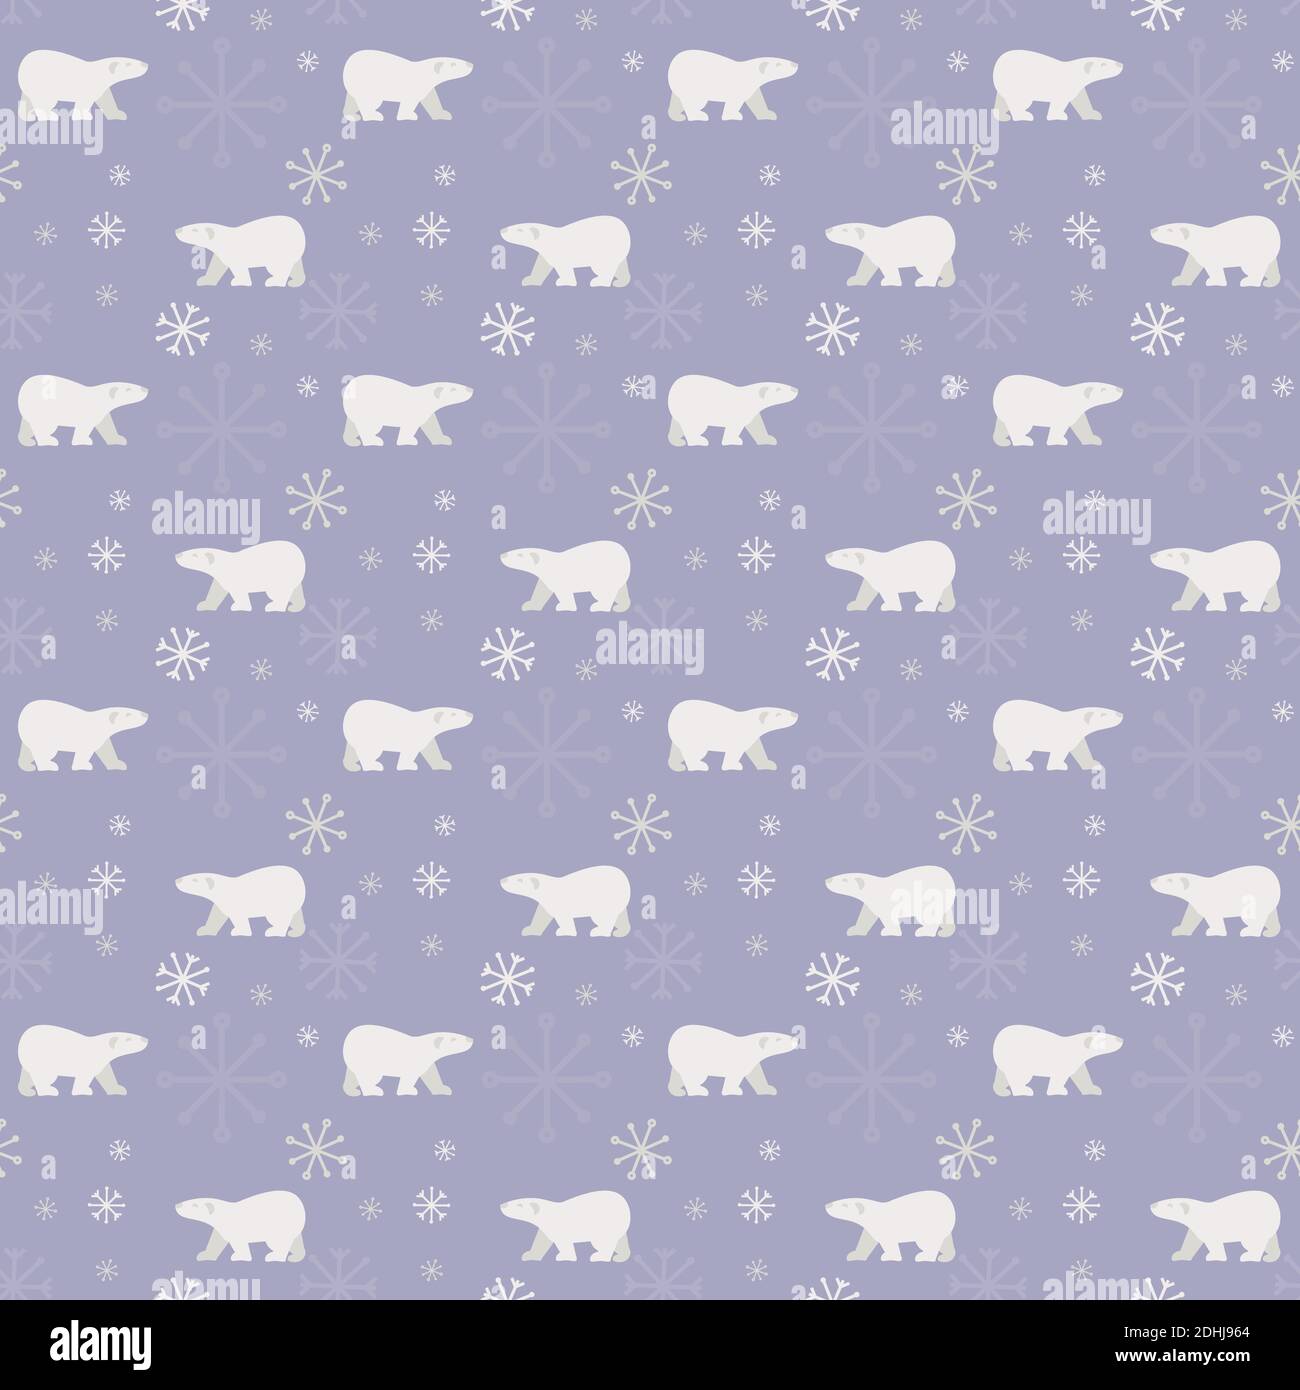 Seamless pattern with polar bears designed in minimalist flat style Stock Vector